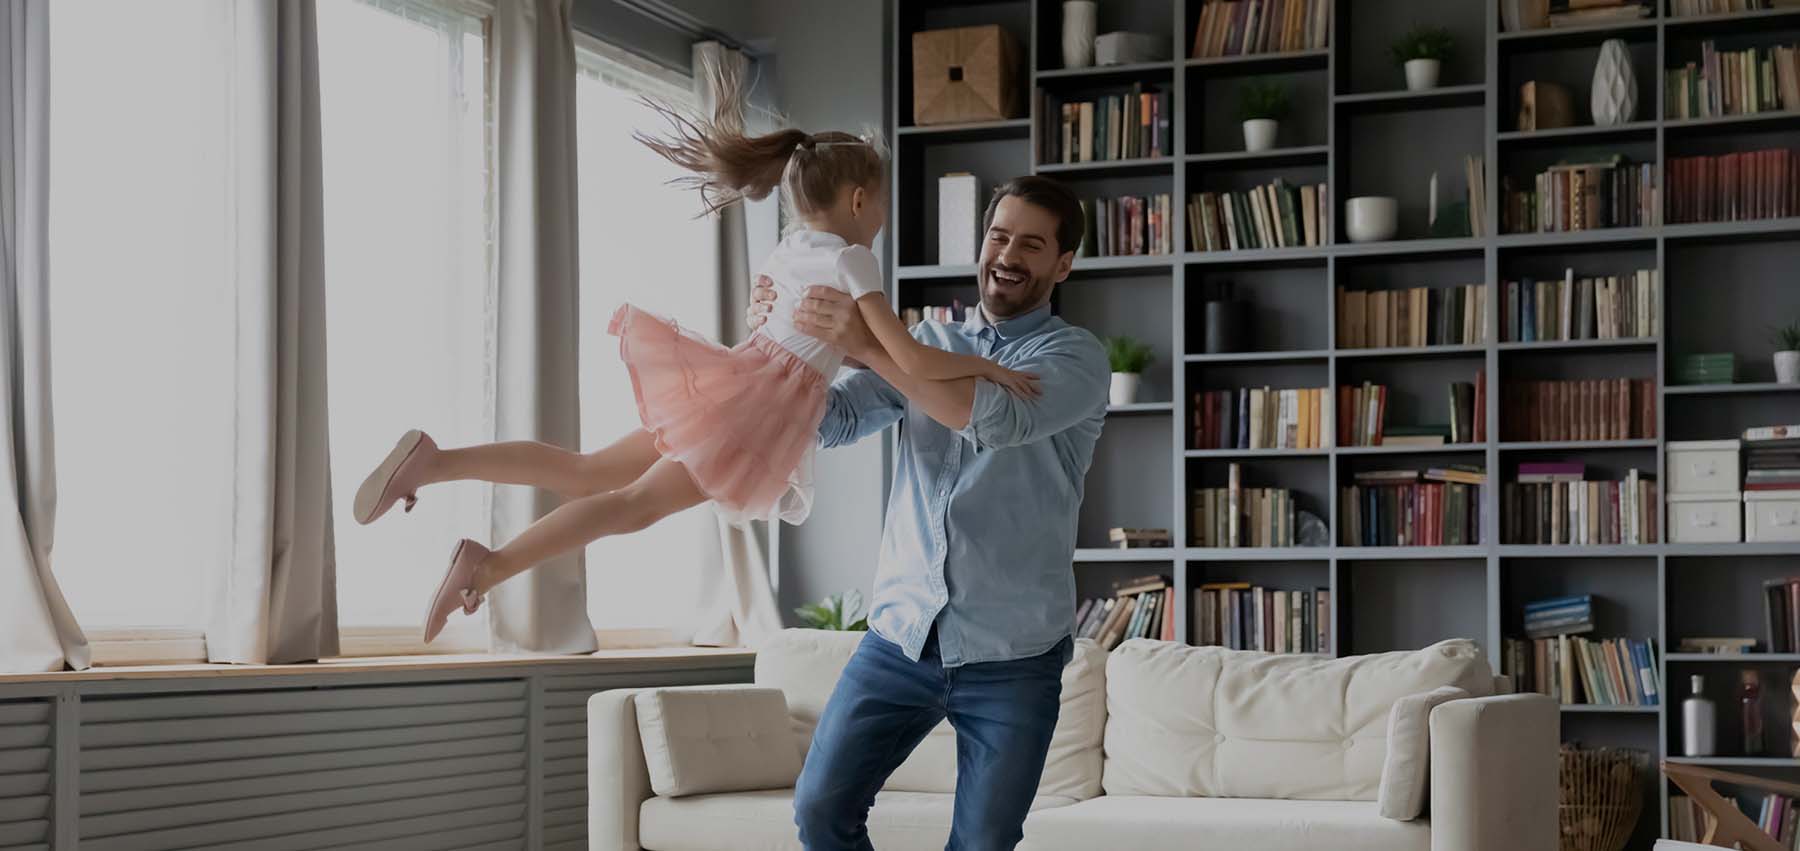 A father swings his daughter around in the lounge